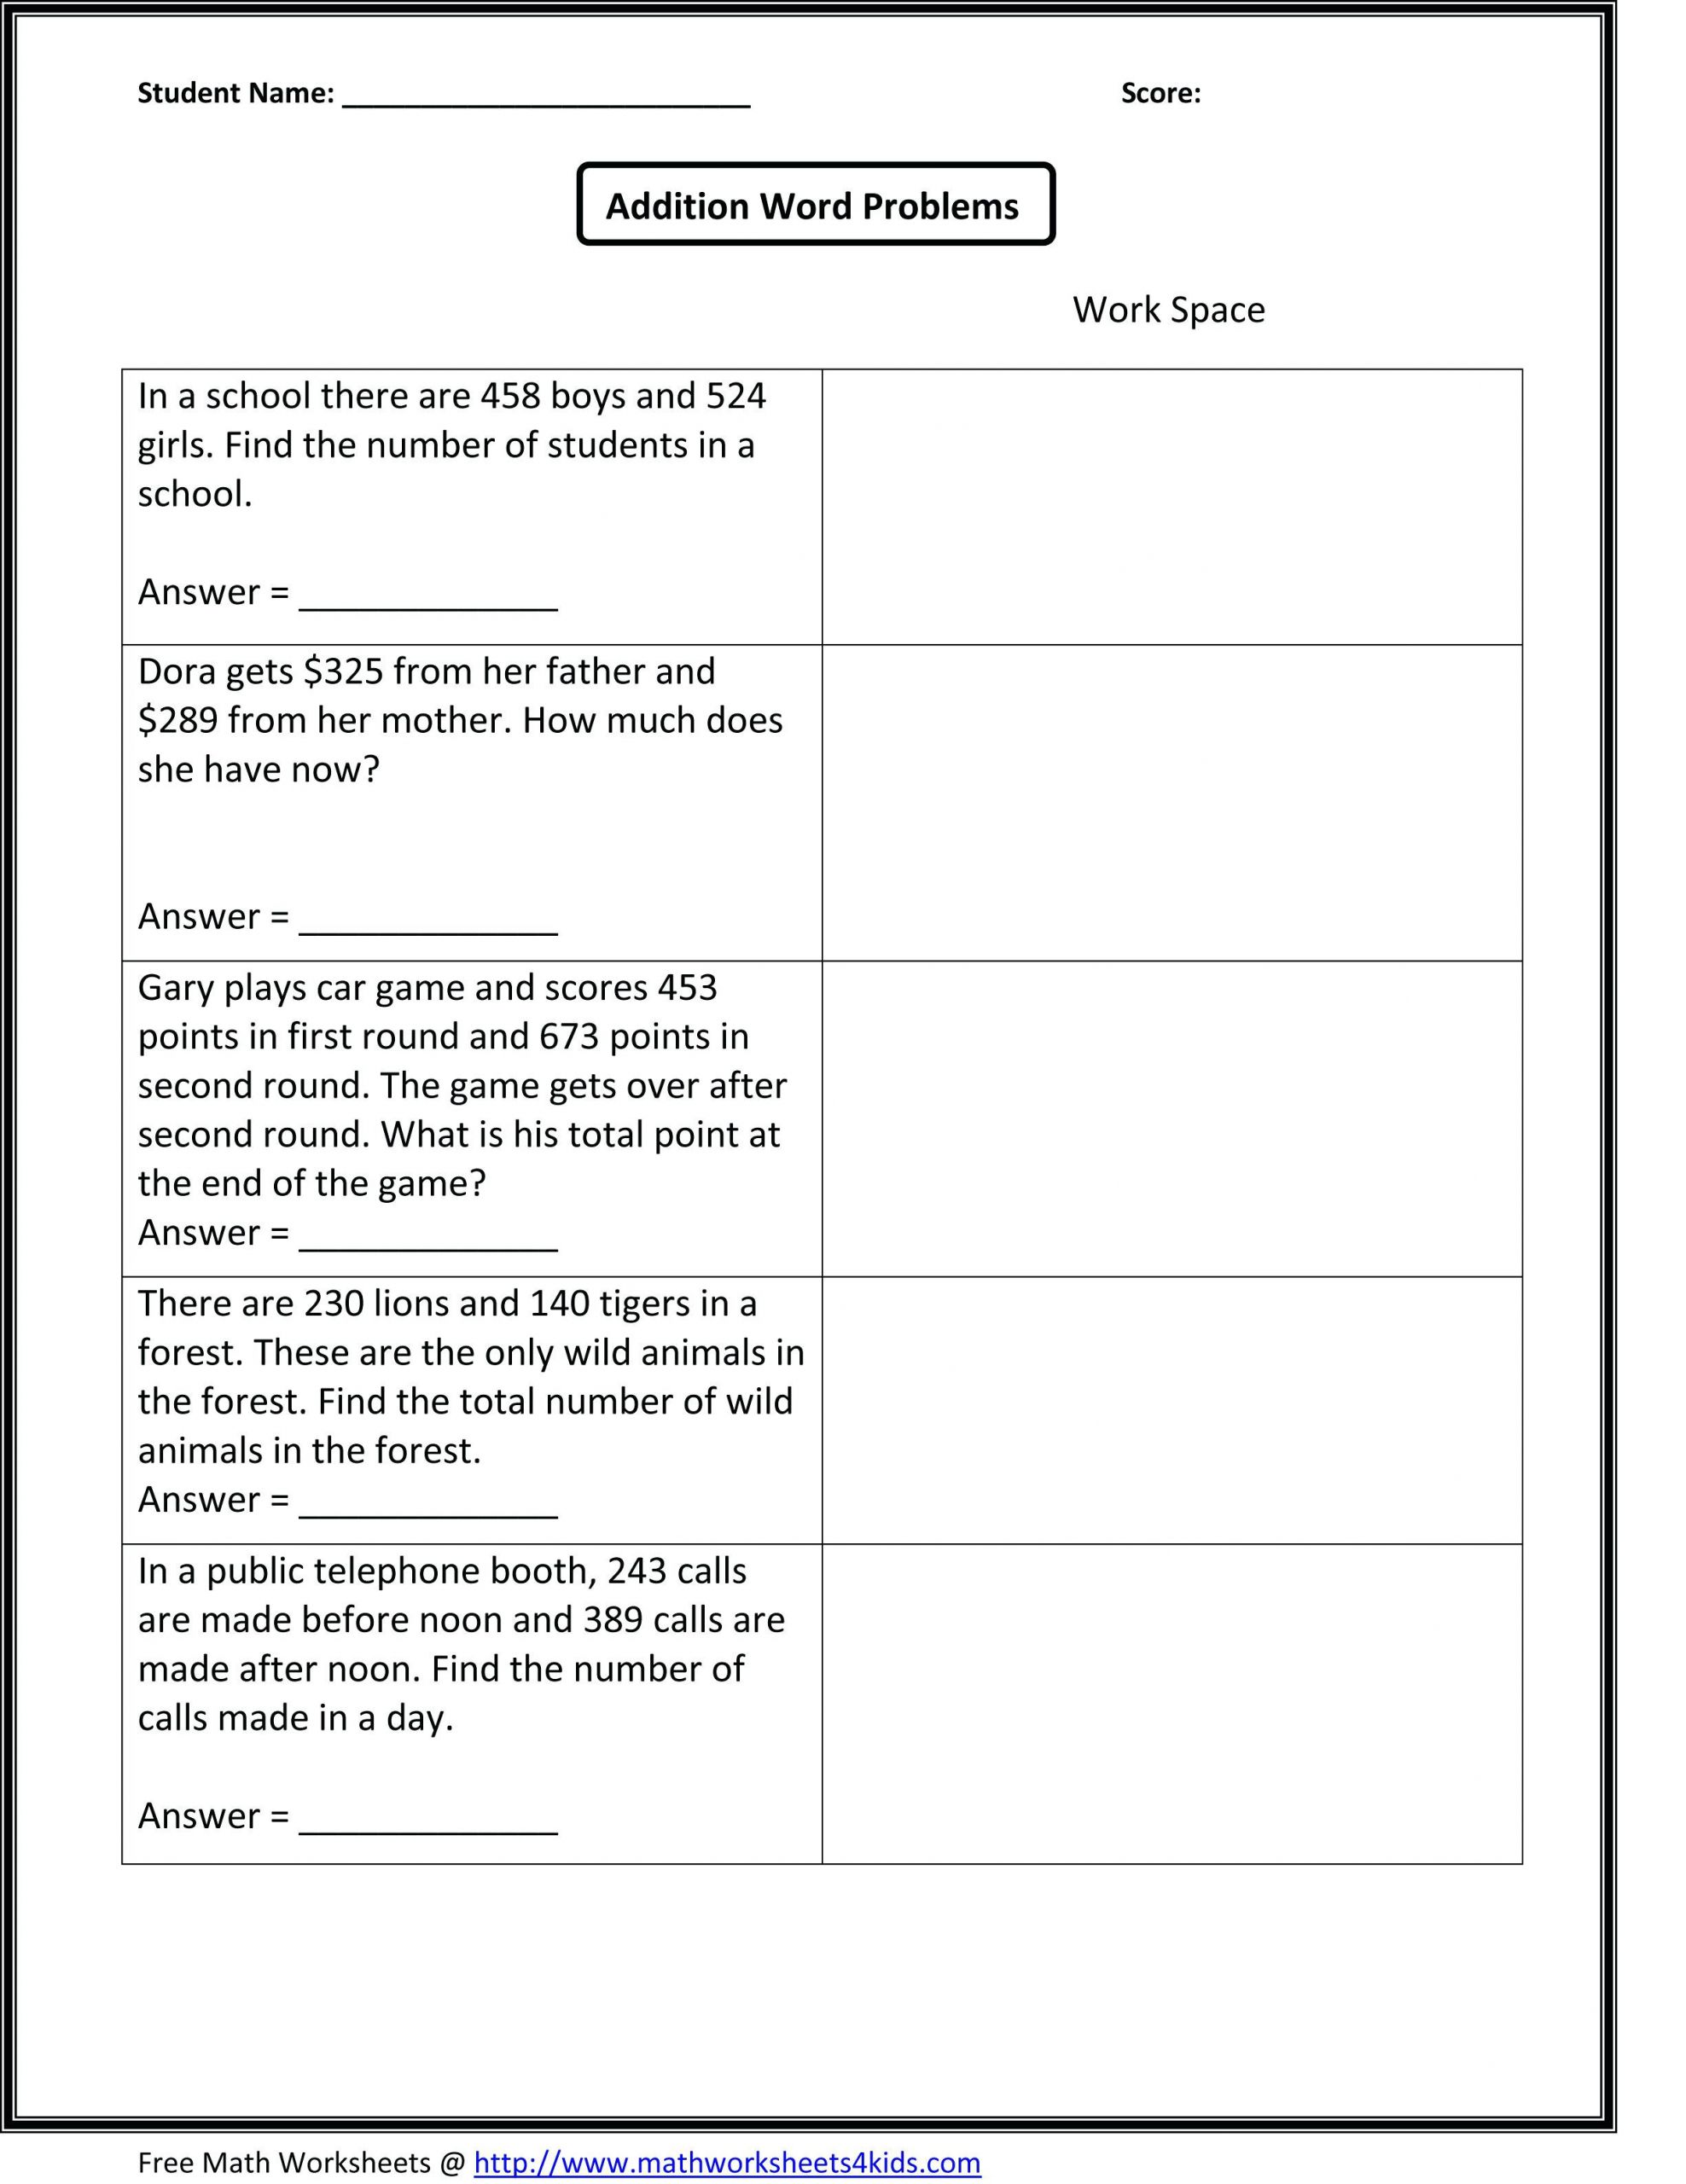 Free Math Worksheets Second Grade 2 Subtraction Subtract 2 Digit Number From whole Hundreds